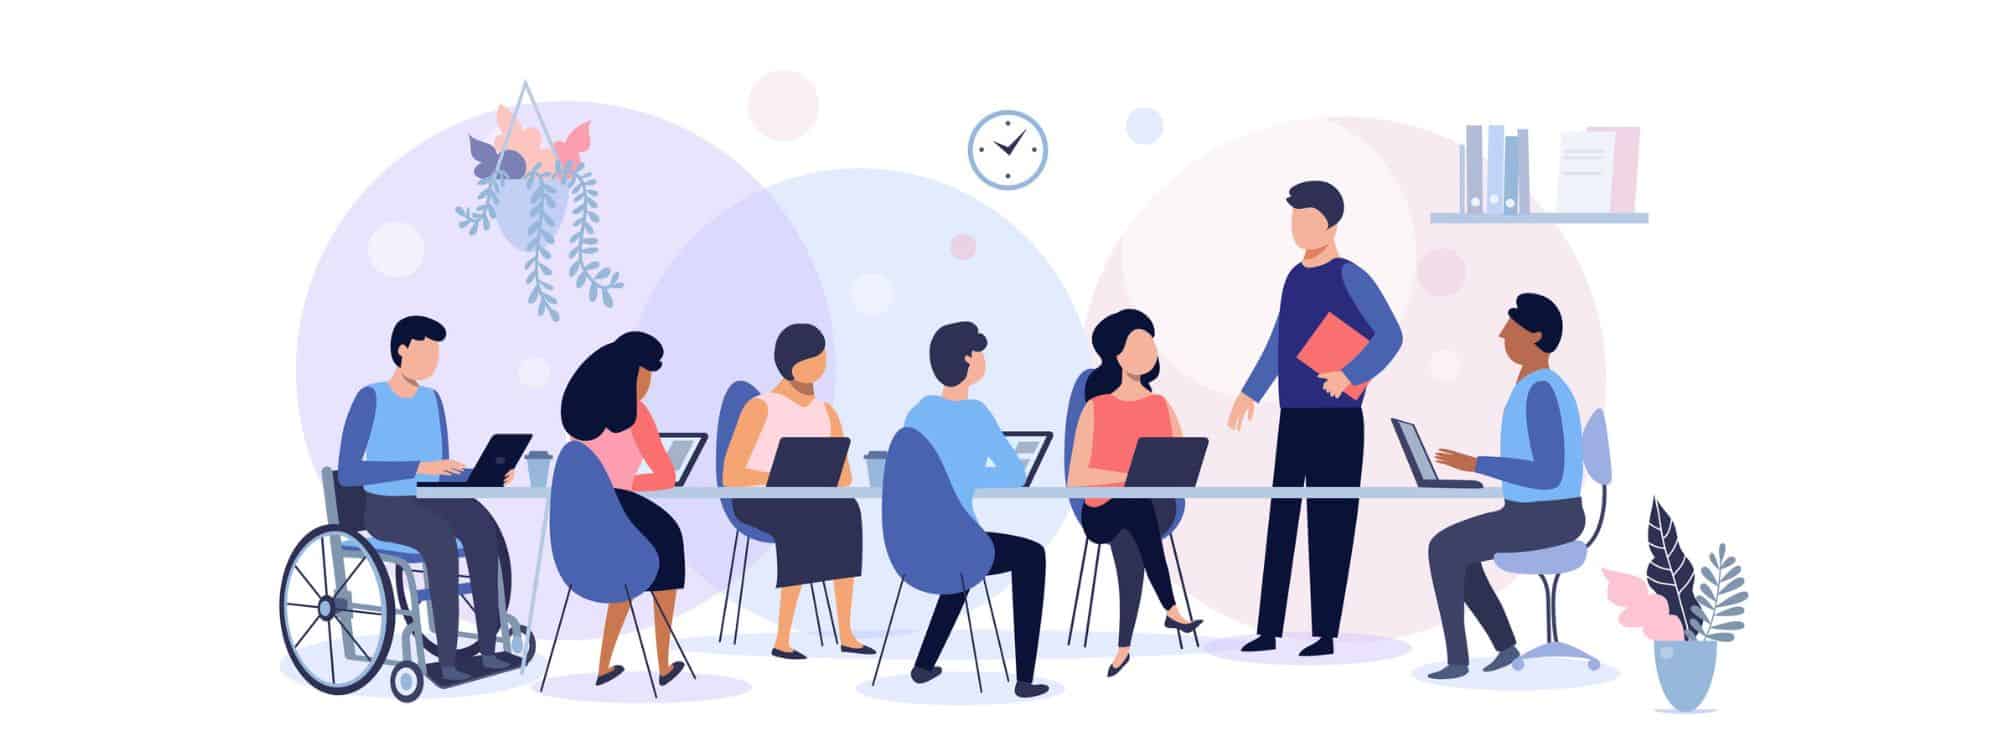 inclusive workplace illustration with a diverse group of employees sitting around a conference room table